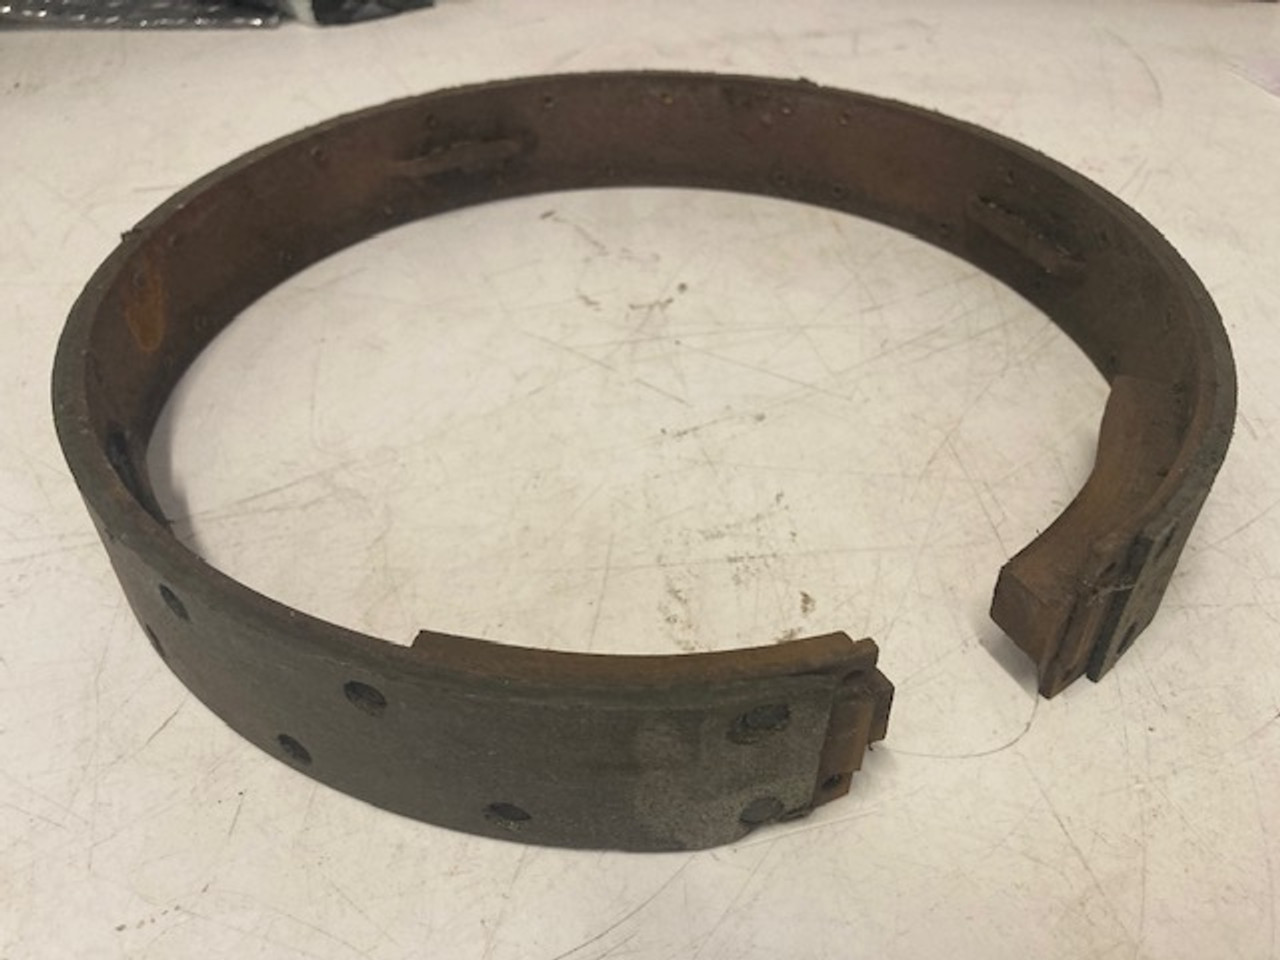  Brake Band with Shoes for 12" Warner Brakes (CH107)